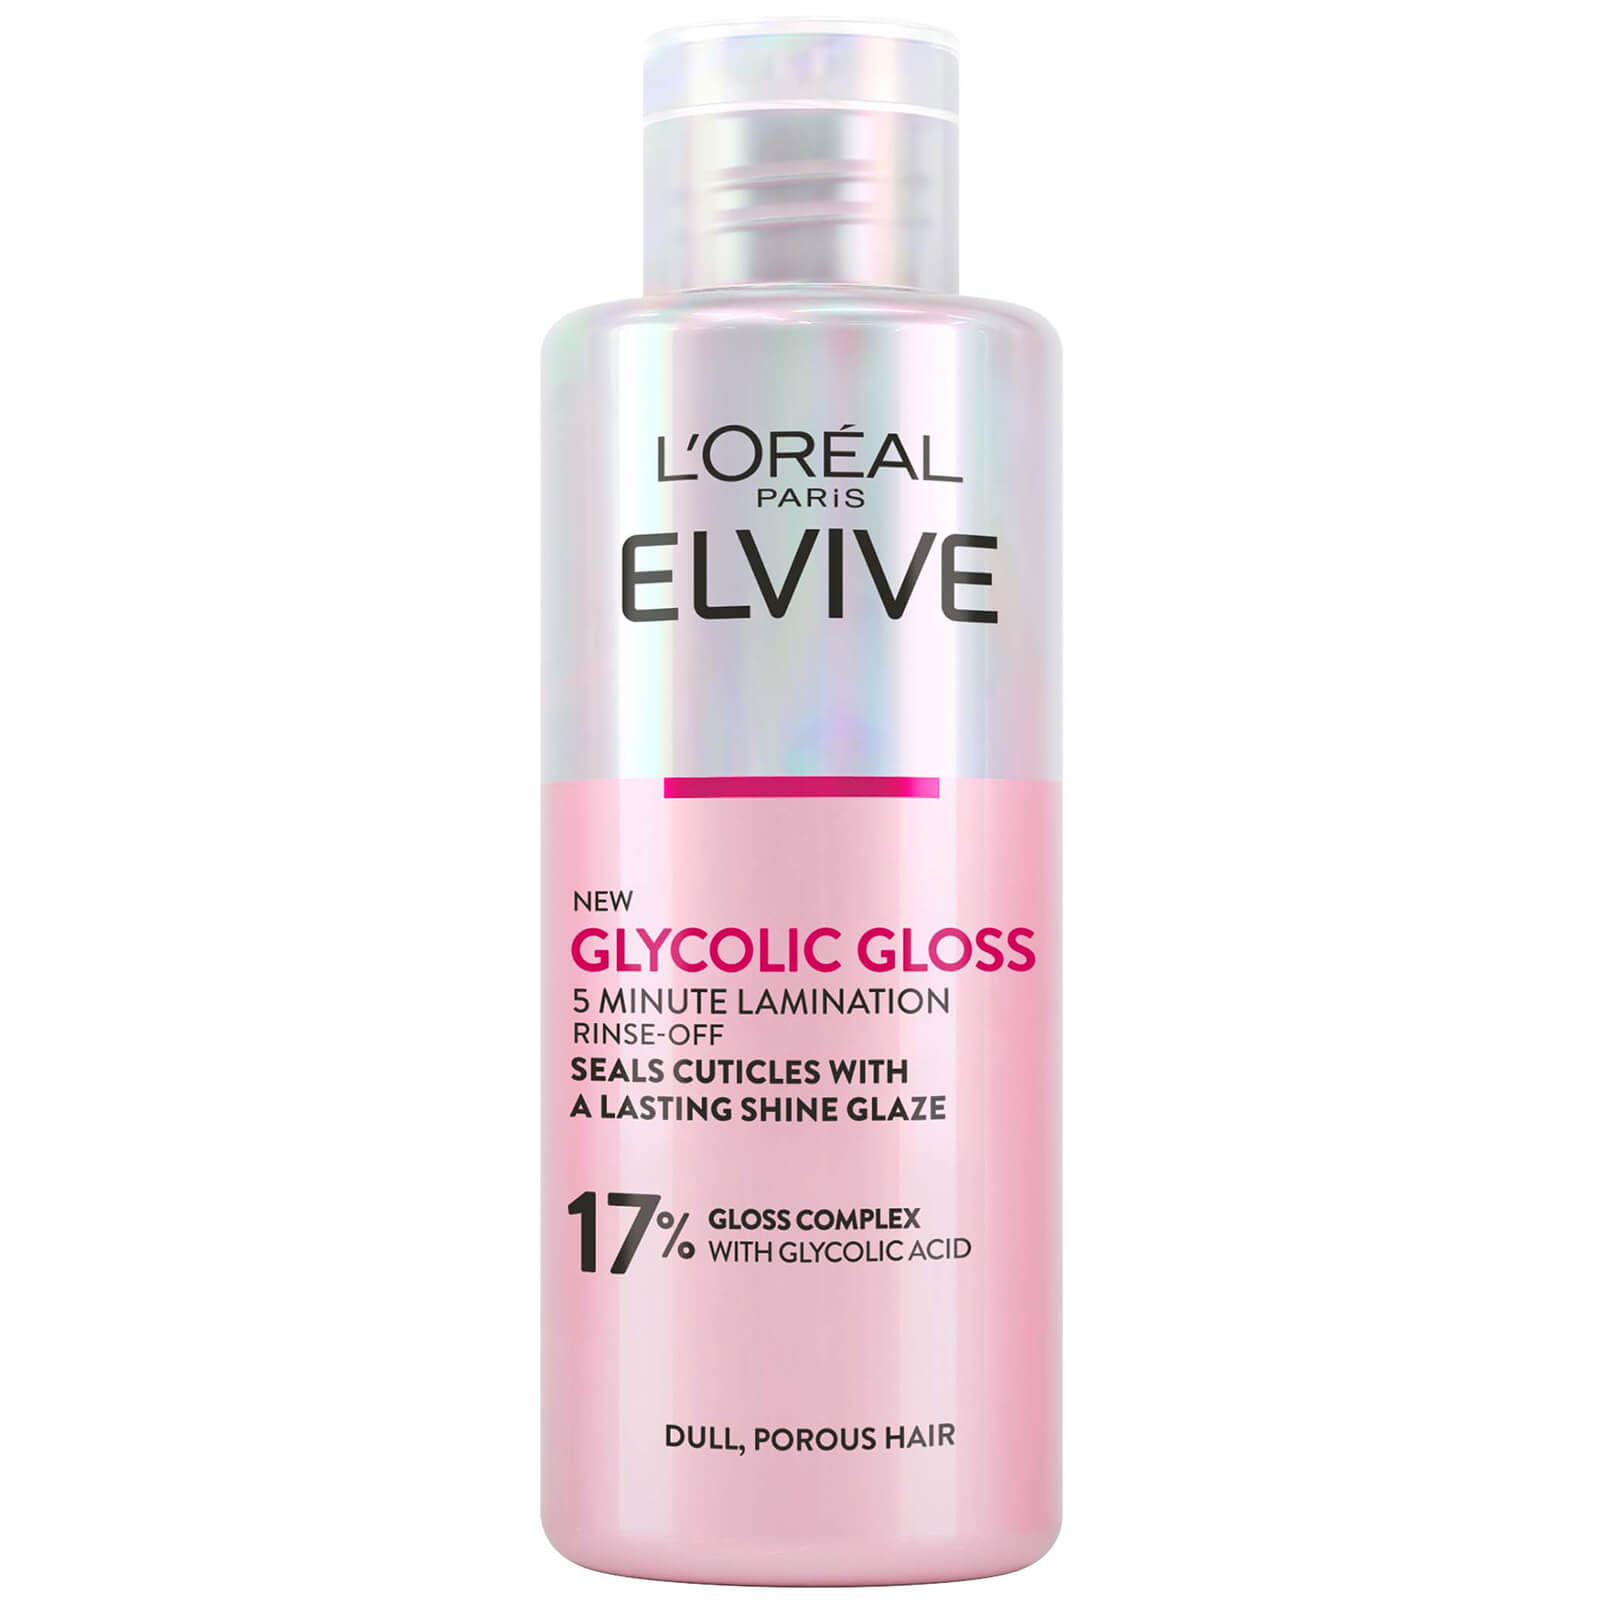 L'Oreal Paris Elvive Glycolic Gloss Rinse-Off 5 minute Lamination Treatment for Dull Hair 150ml